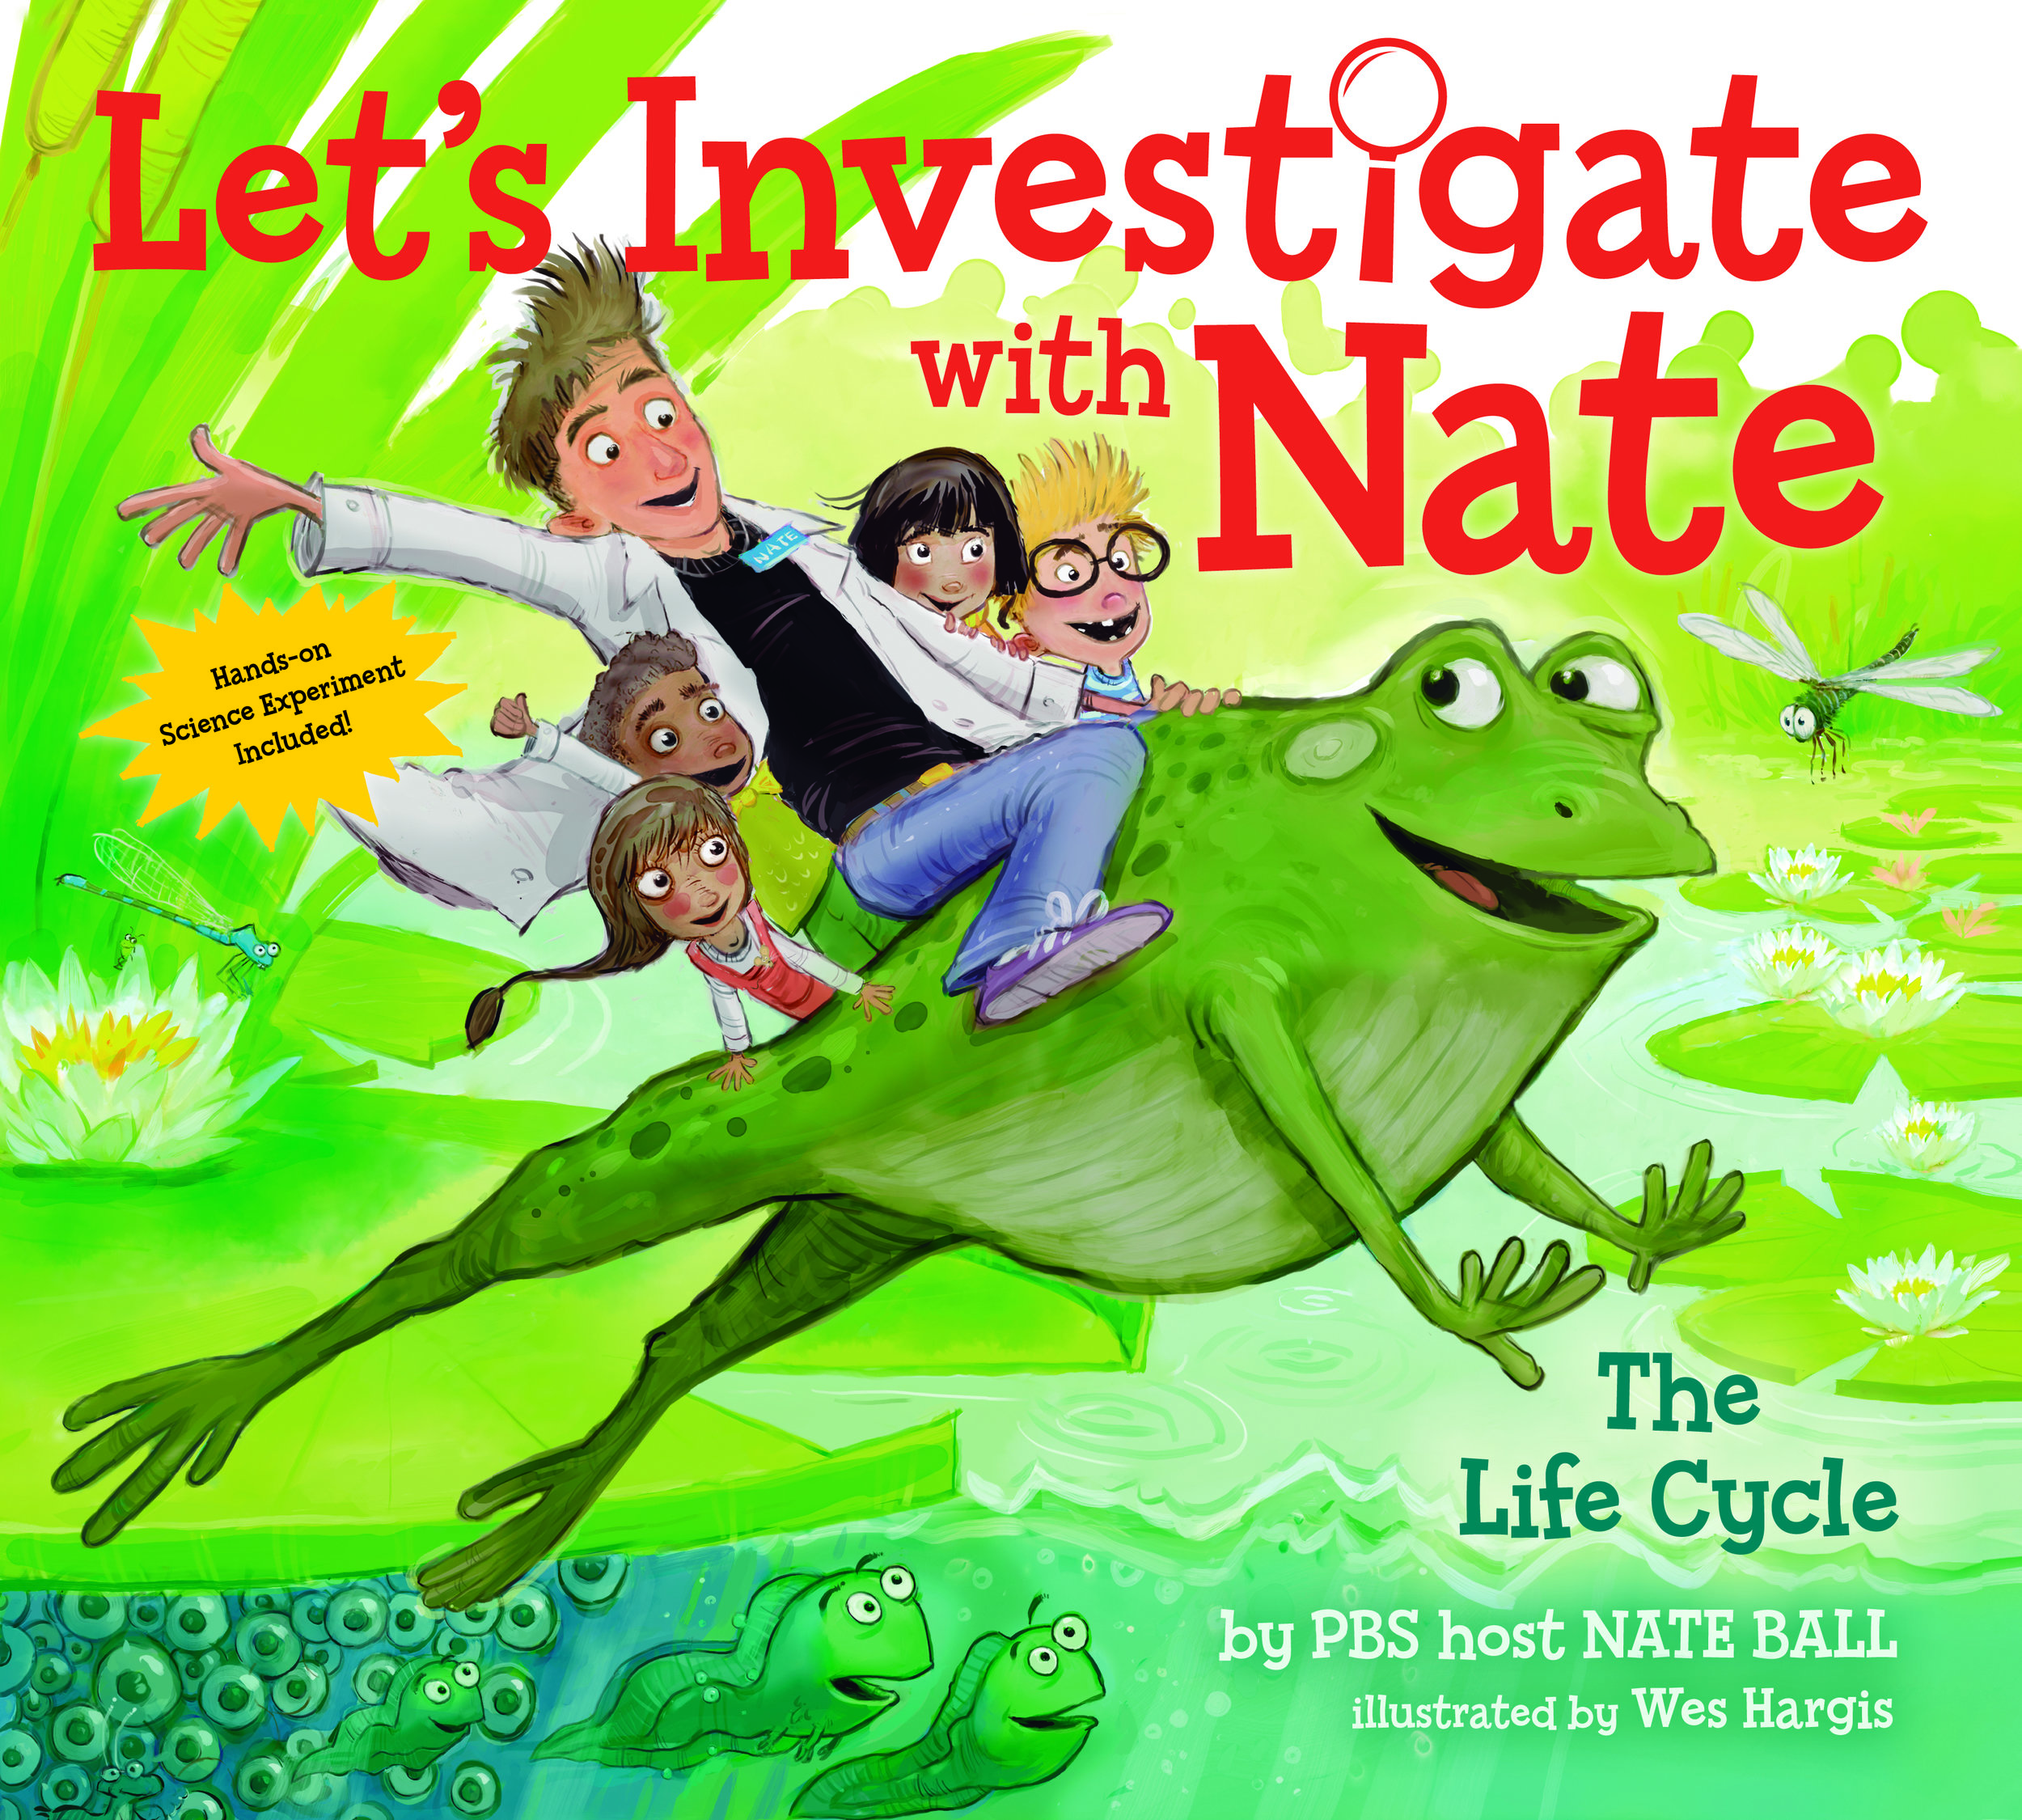 Let's Investigate with Nate #4: The Life Cycle